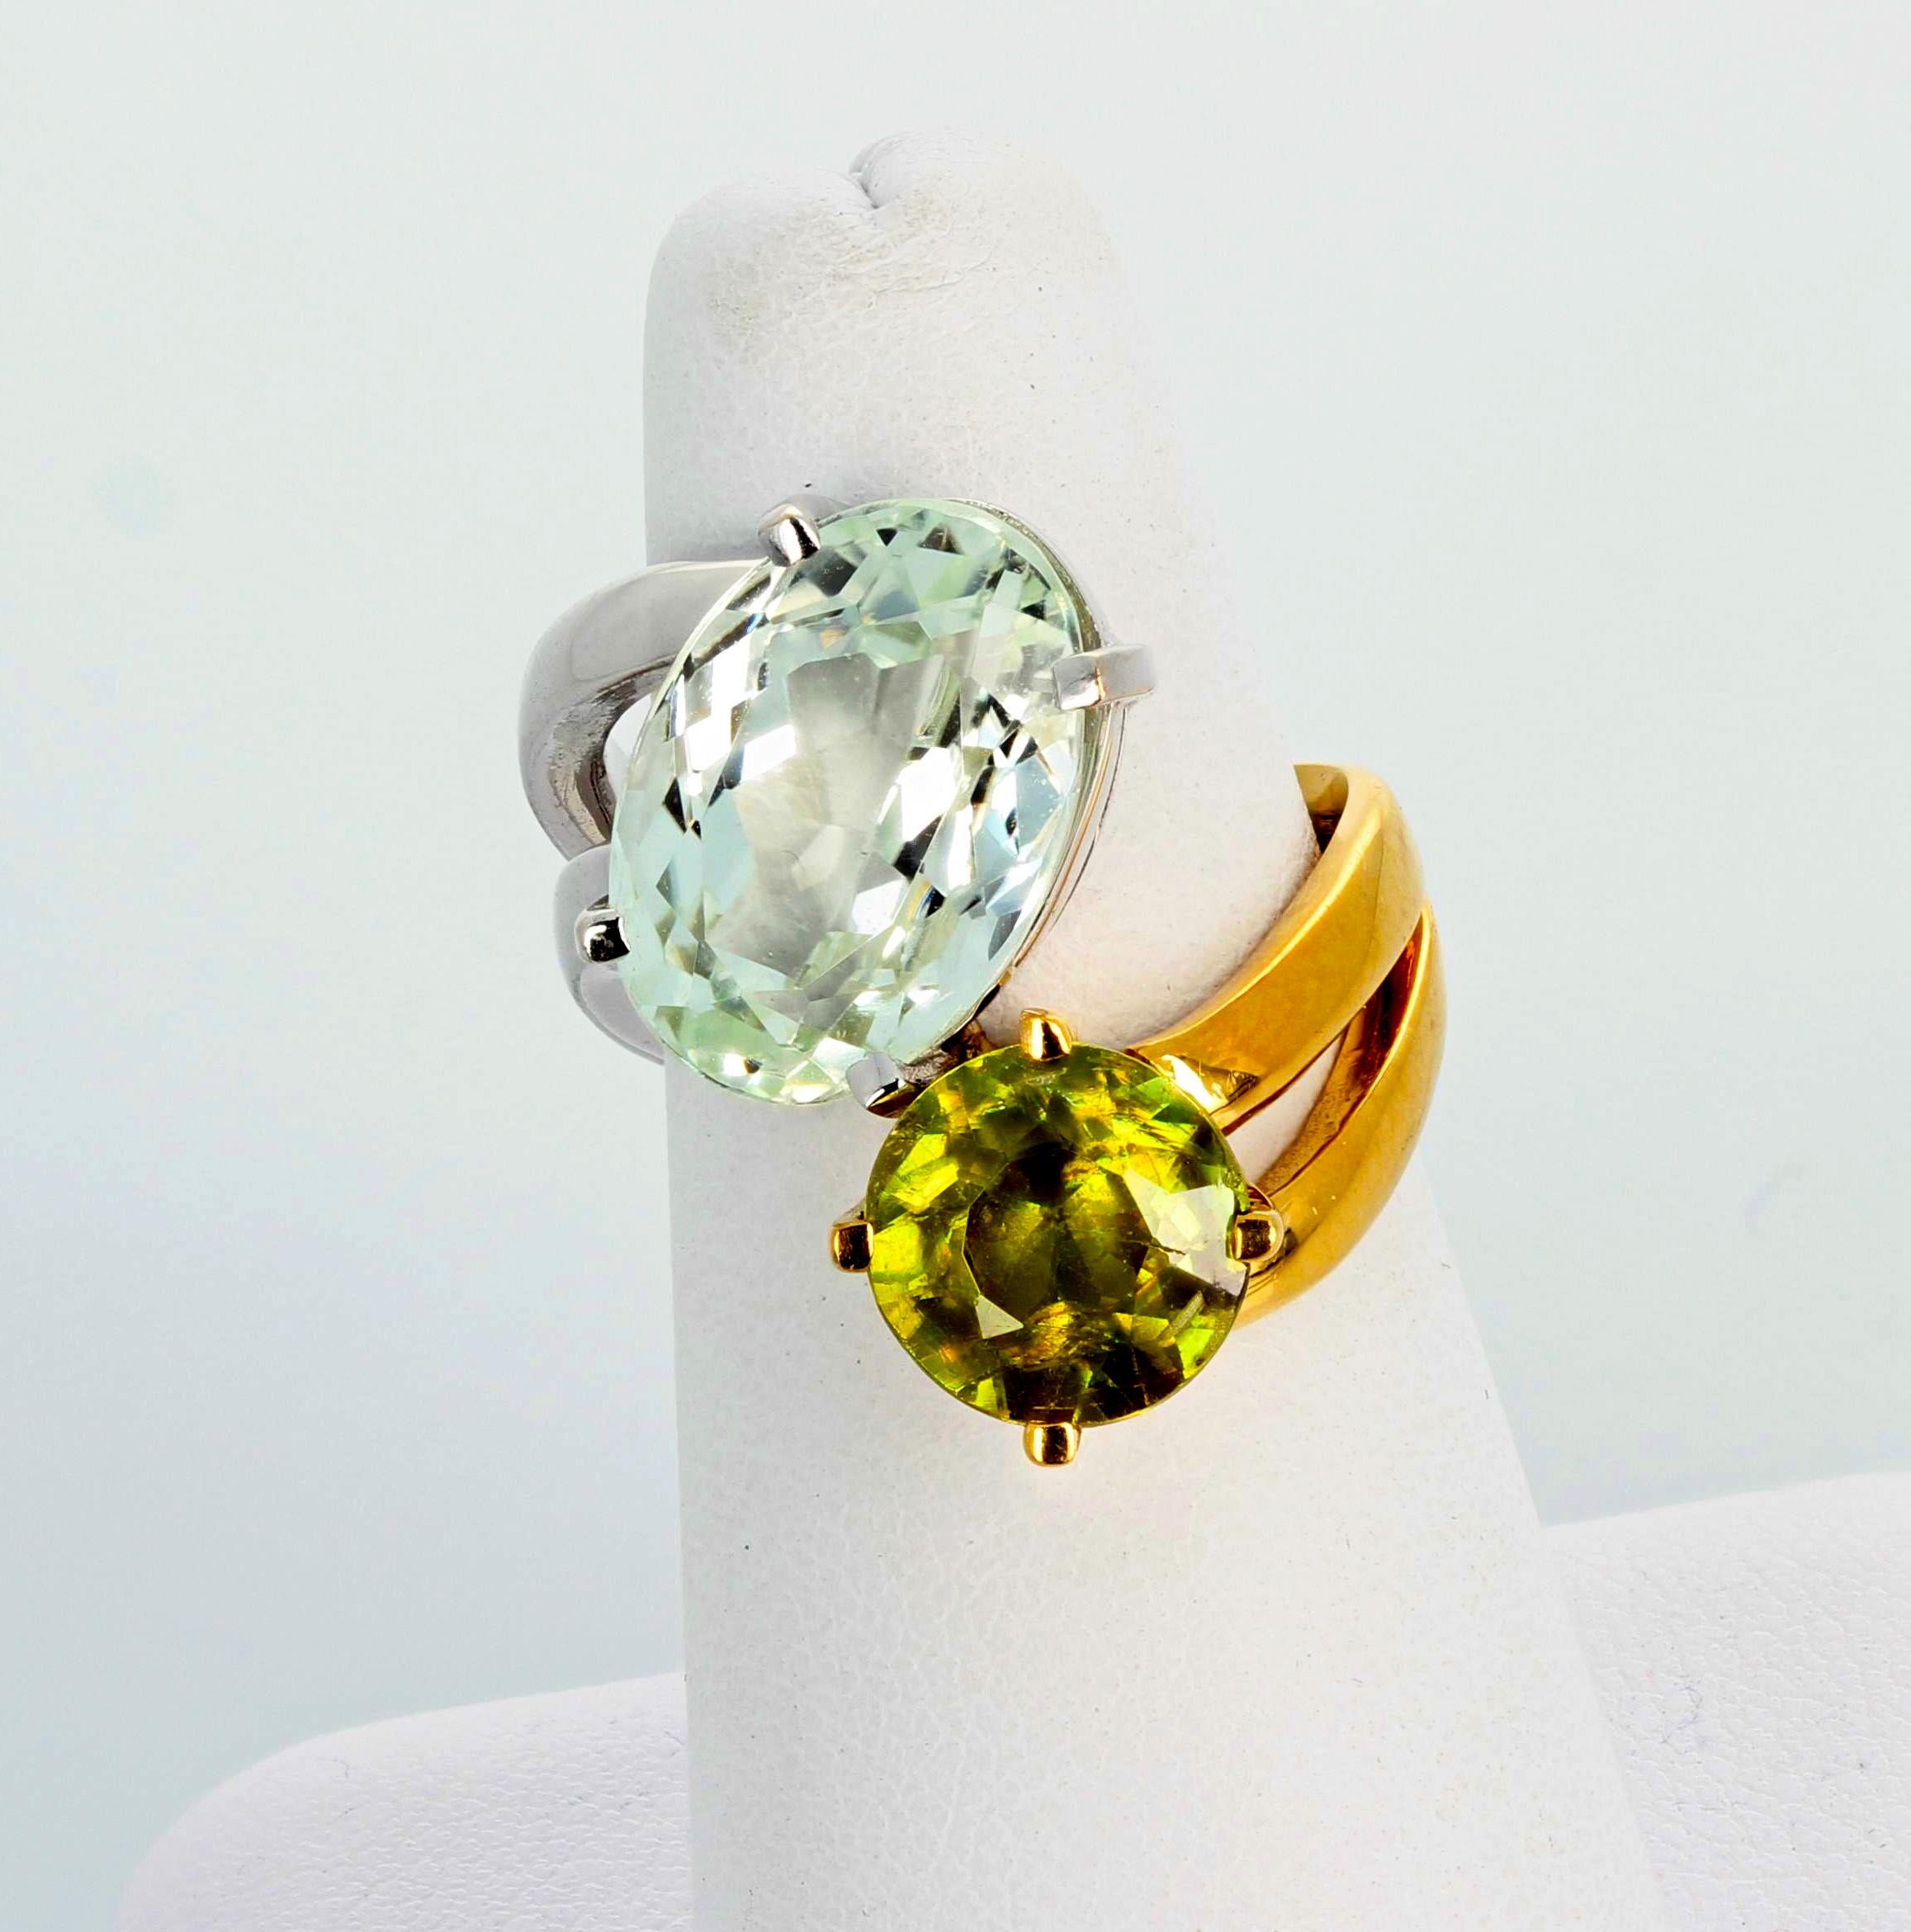 AJD Rare Splendid 6.8 Ct Amblygonite & 2.2 Ct Sphene Gold Cocktail Ring In New Condition For Sale In Raleigh, NC